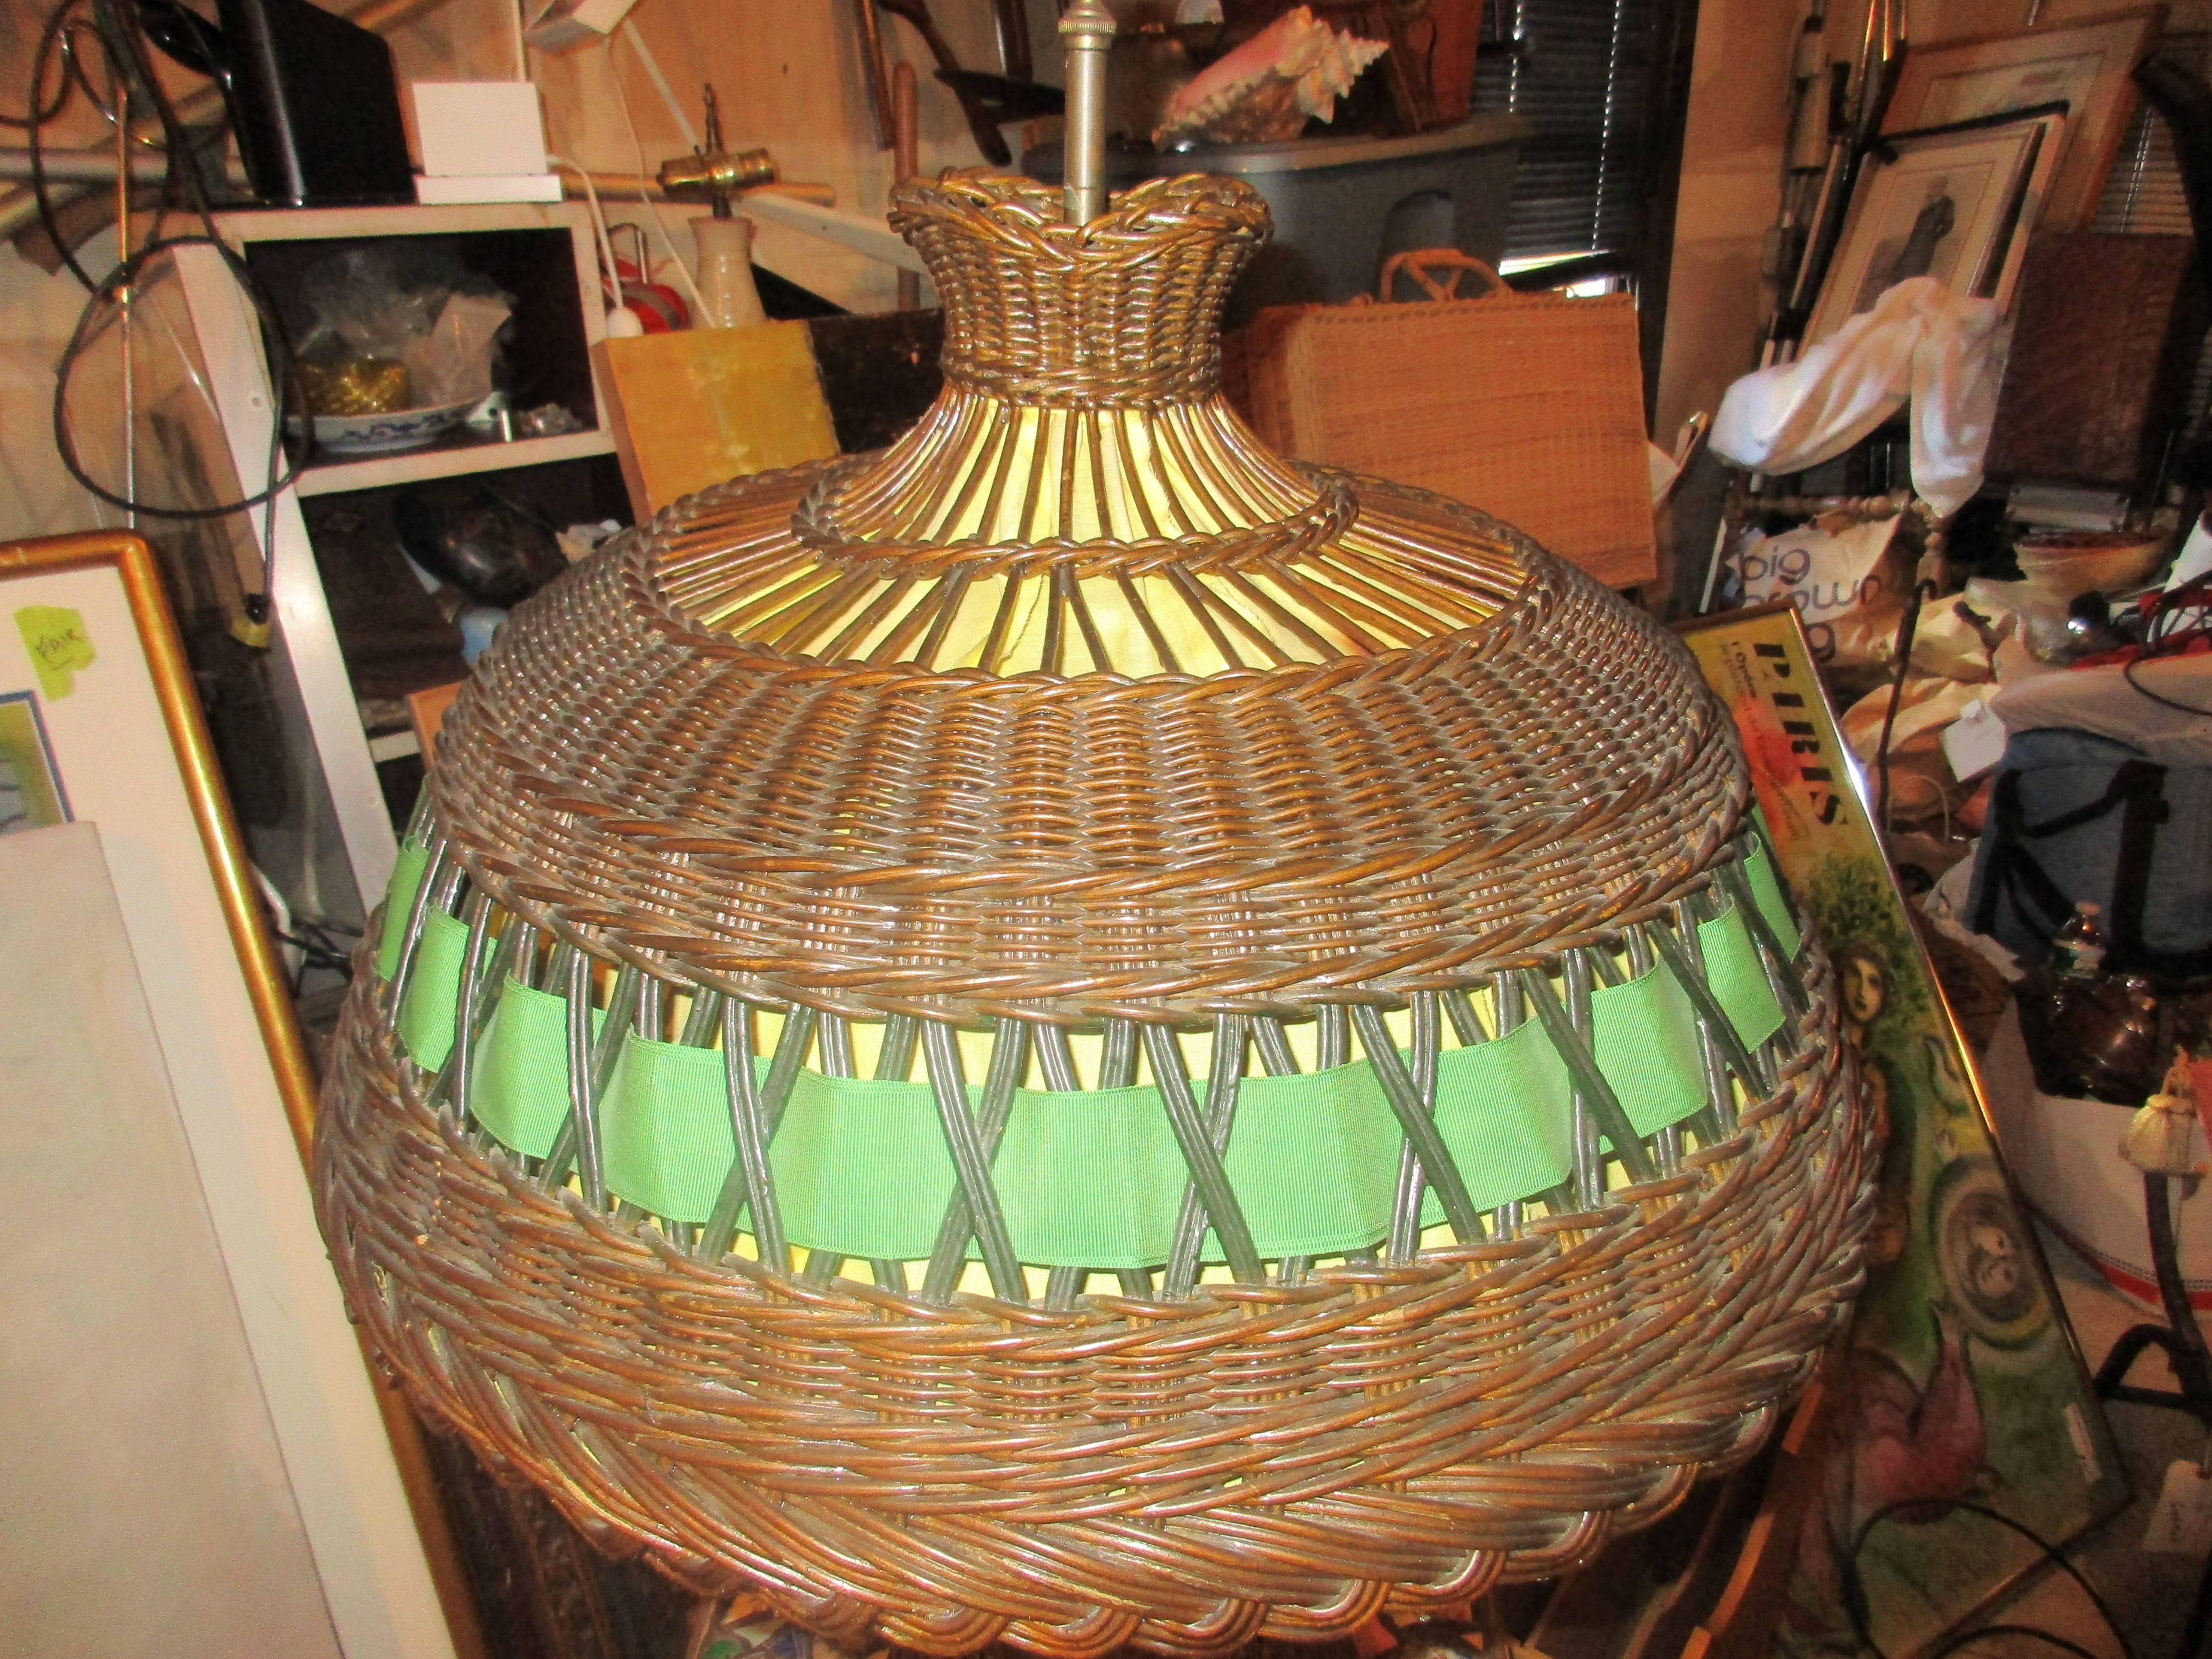 19th century natural wicker table lamp. Newly wired. Shade relined.
From a Hampton Estate.